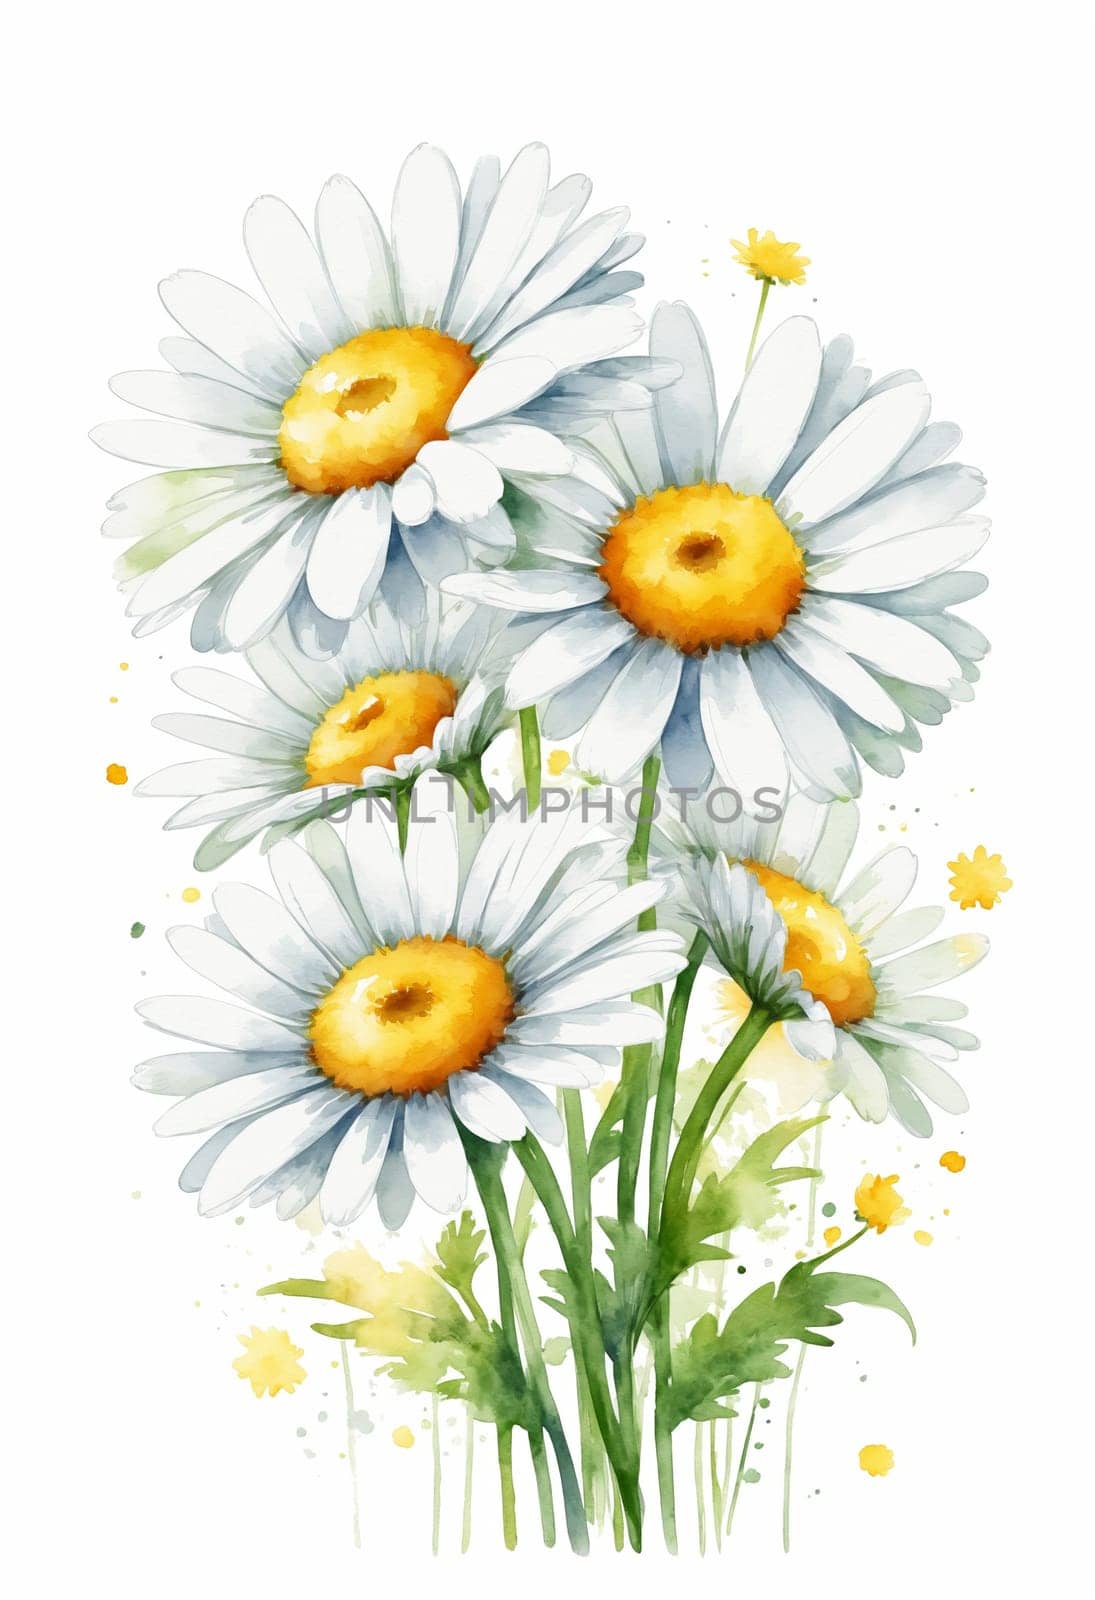 Beautiful image with watercolor daisies on white background.